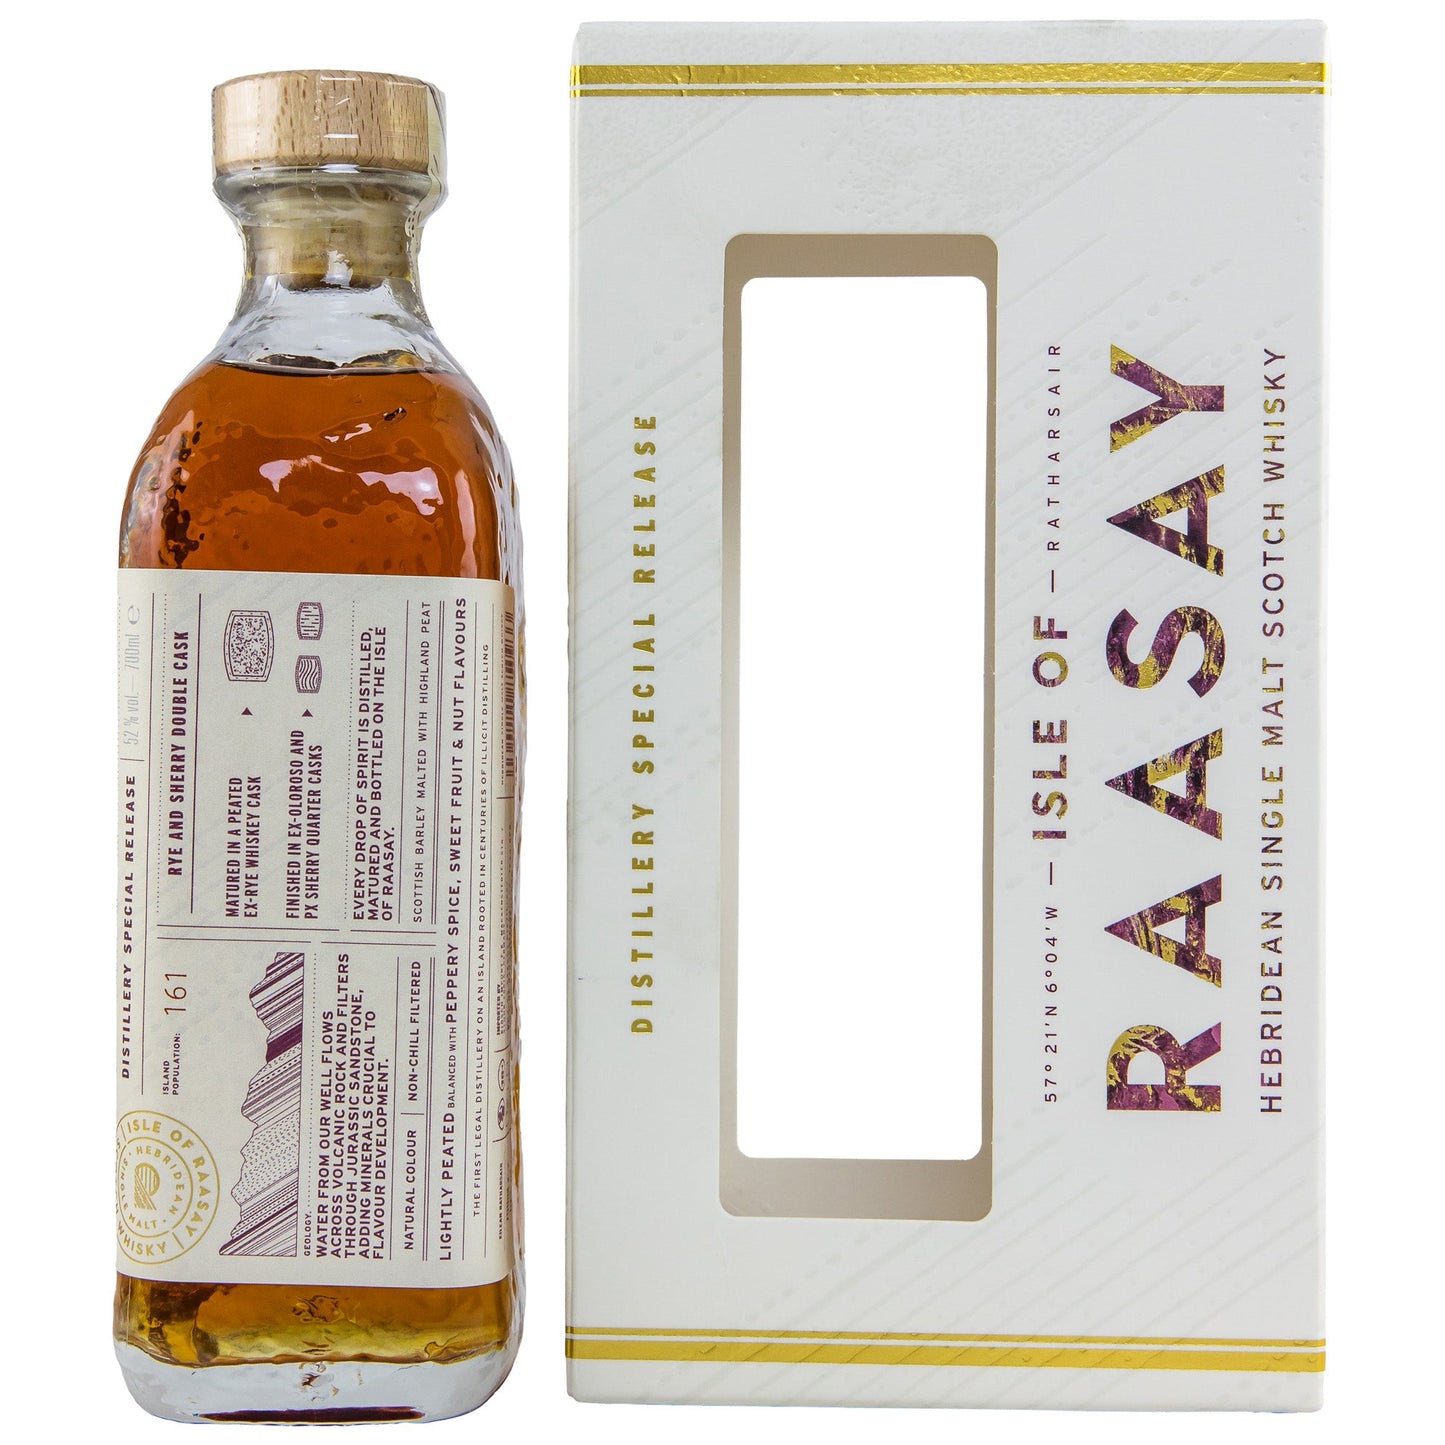 Isle of Raasay | Special Release | Sherry Finish | Herbidean Single Malt Scotch Whisky | 0,7l | 52%GET A BOTTLE